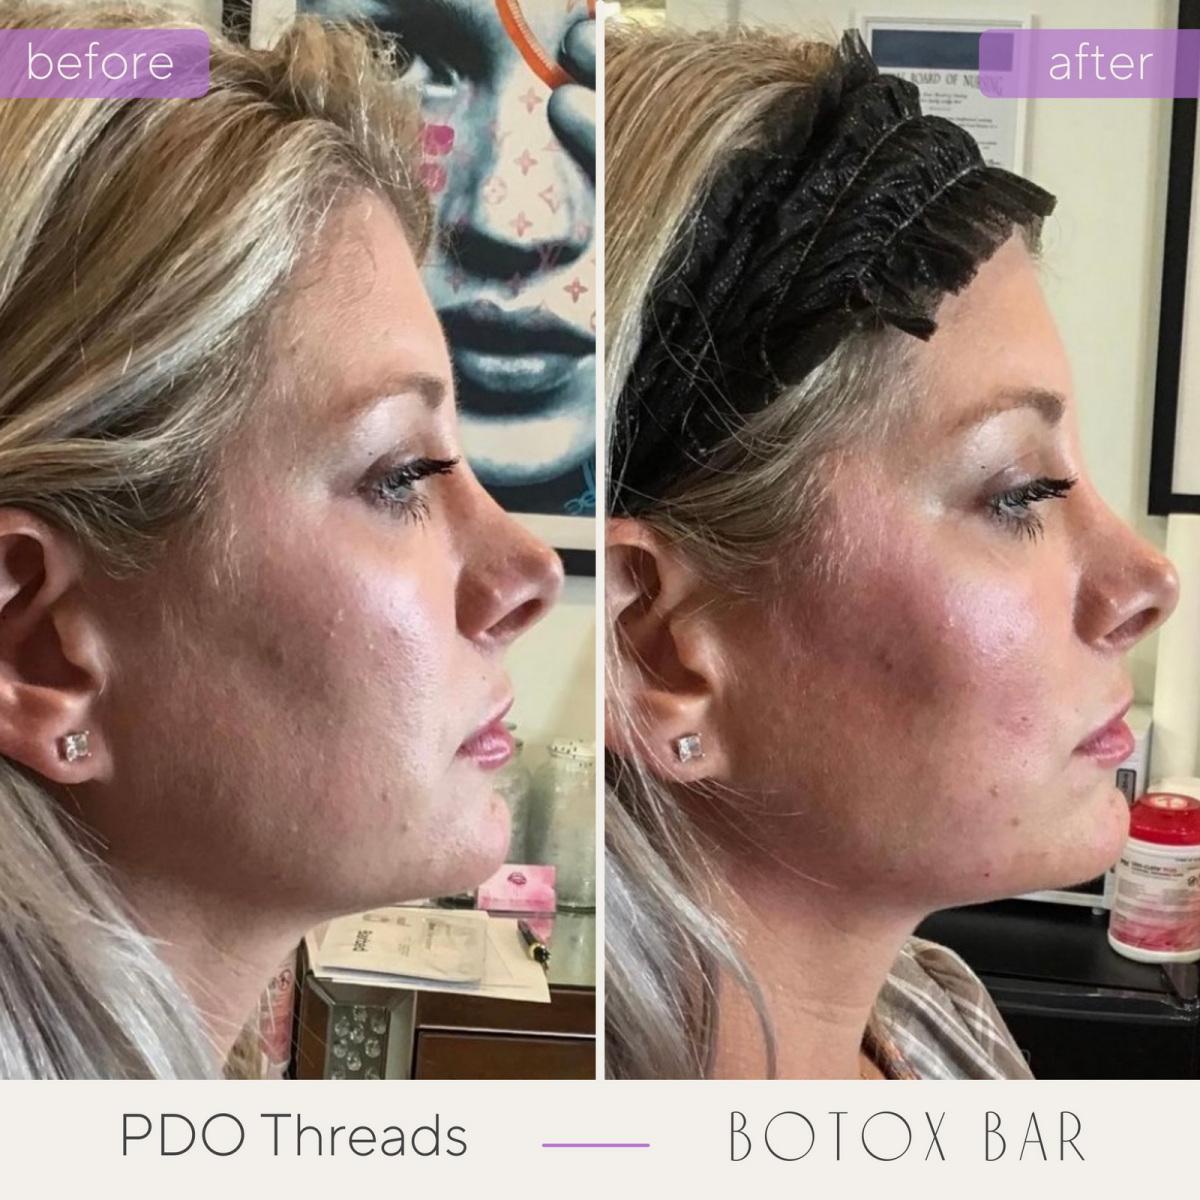 Before and After PDO Threads in The Botox Bar and Aesthetics at Dallas & Sherman, TX